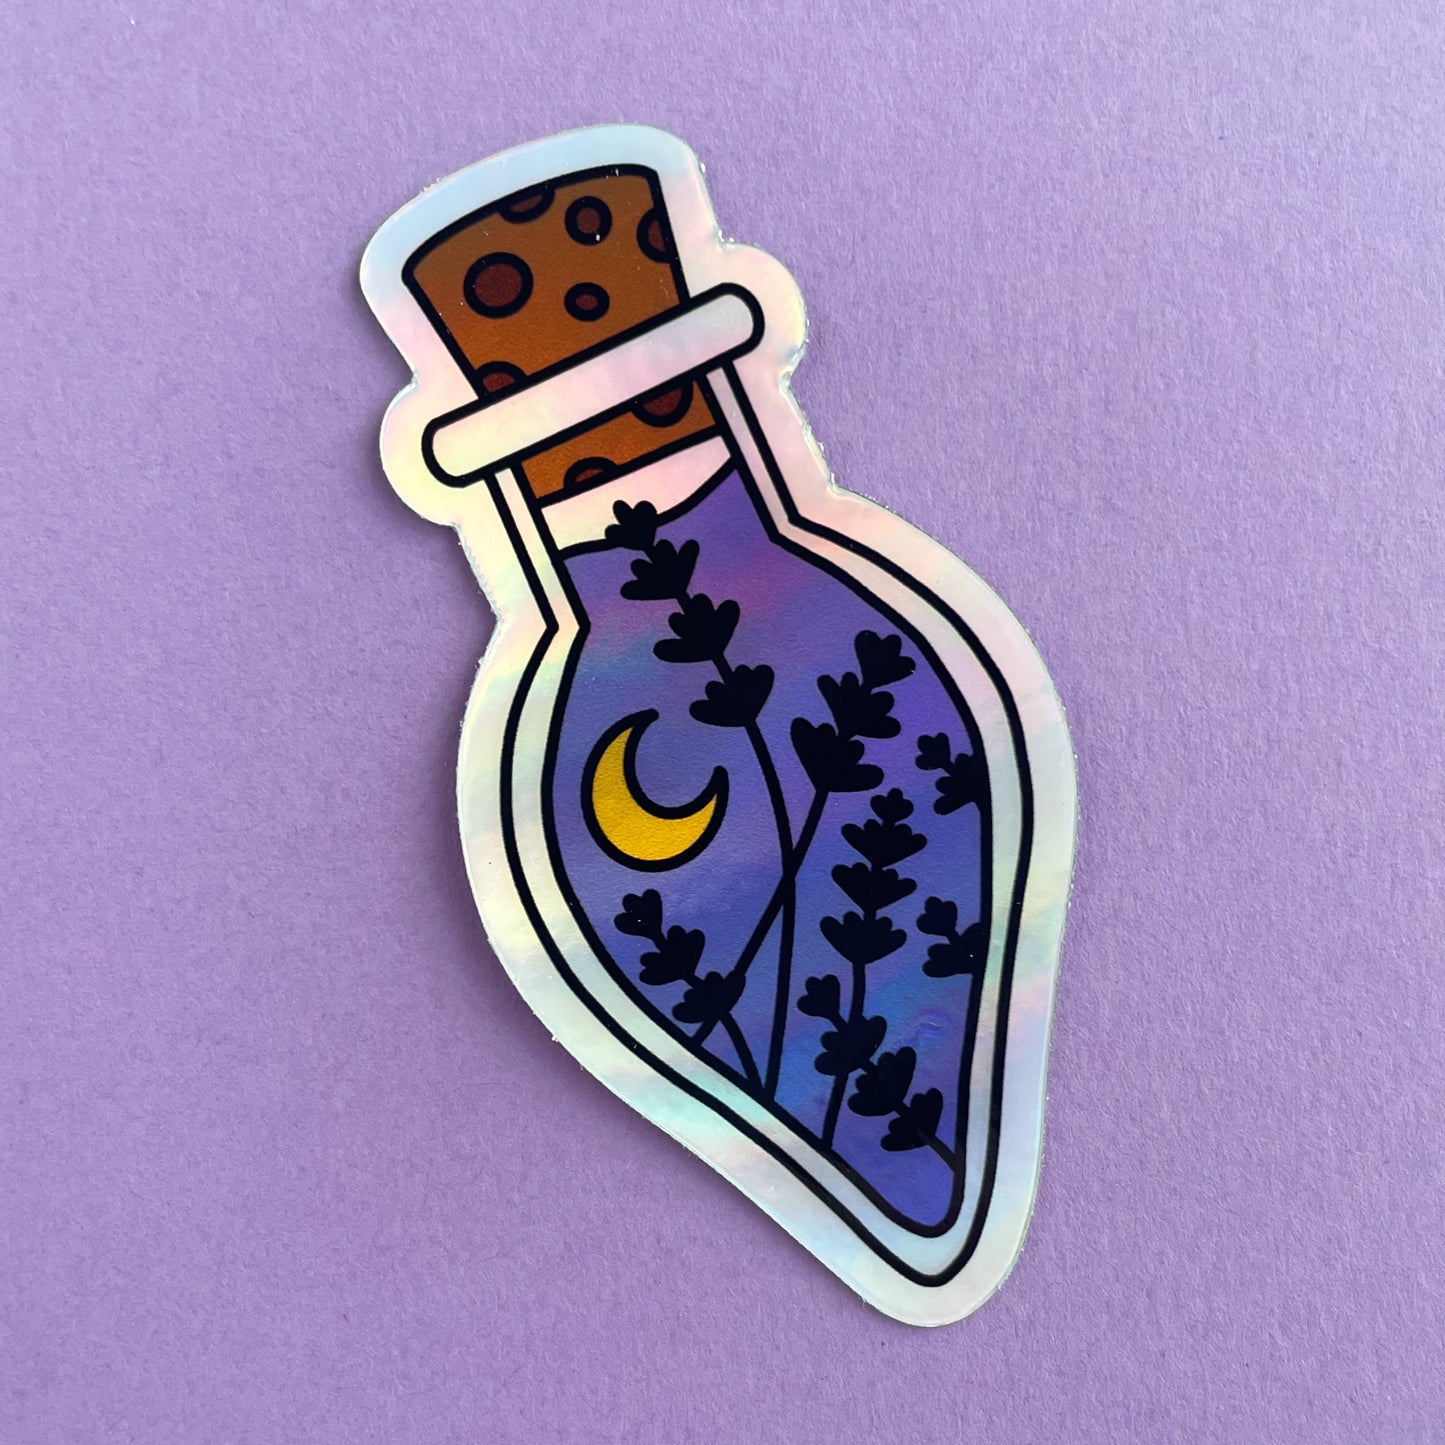 A holographic sticker in the shape of a tear drop shaped potion bottle. The bottle has a cork and is filled with purple liquid, flowers, and a crescent moon. The sticker is on a lavender background.